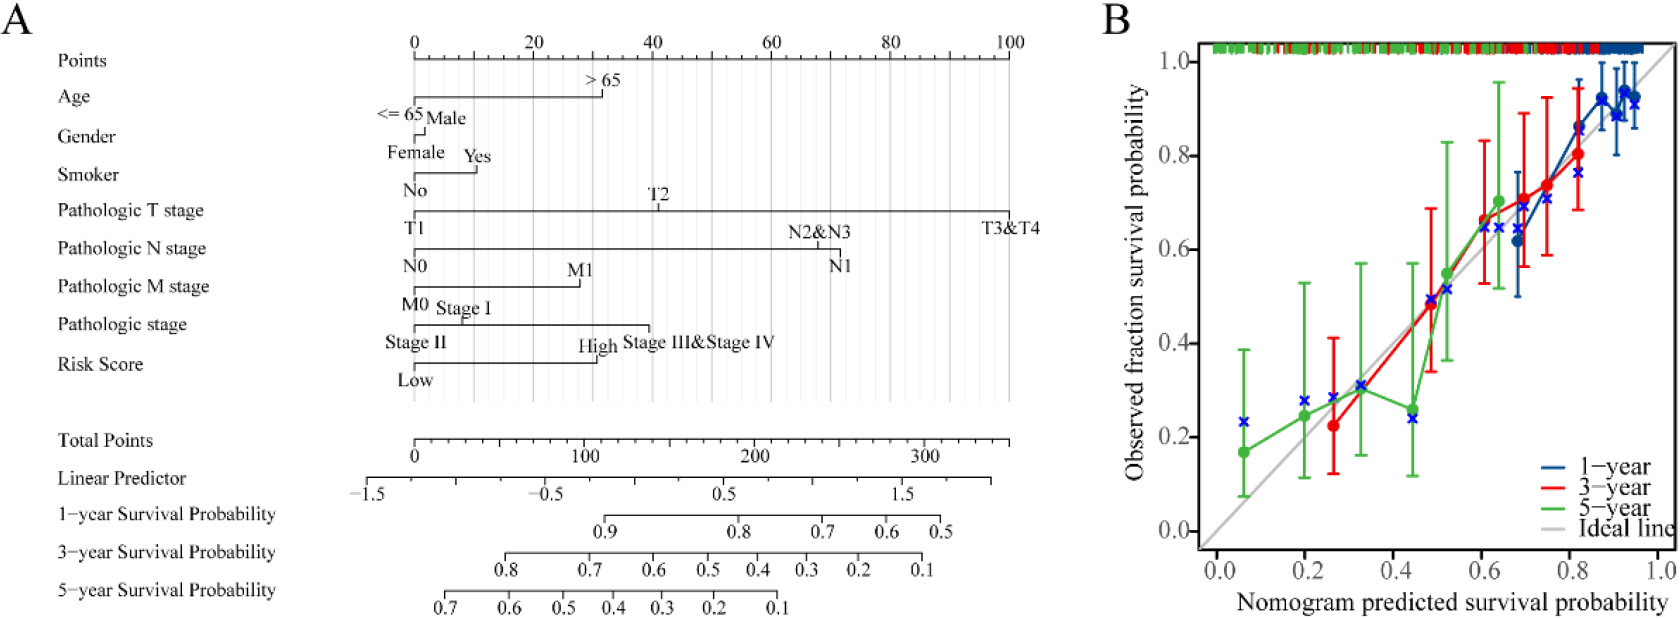 Nomogram development and validation. (A) Nomogram to predict the 1-year, 3-year and 5-year overall survival (OS) rate of lung adenocarcinoma (LUAD) patients. (B) Calibration curve for the OS nomogram model in LUAD.